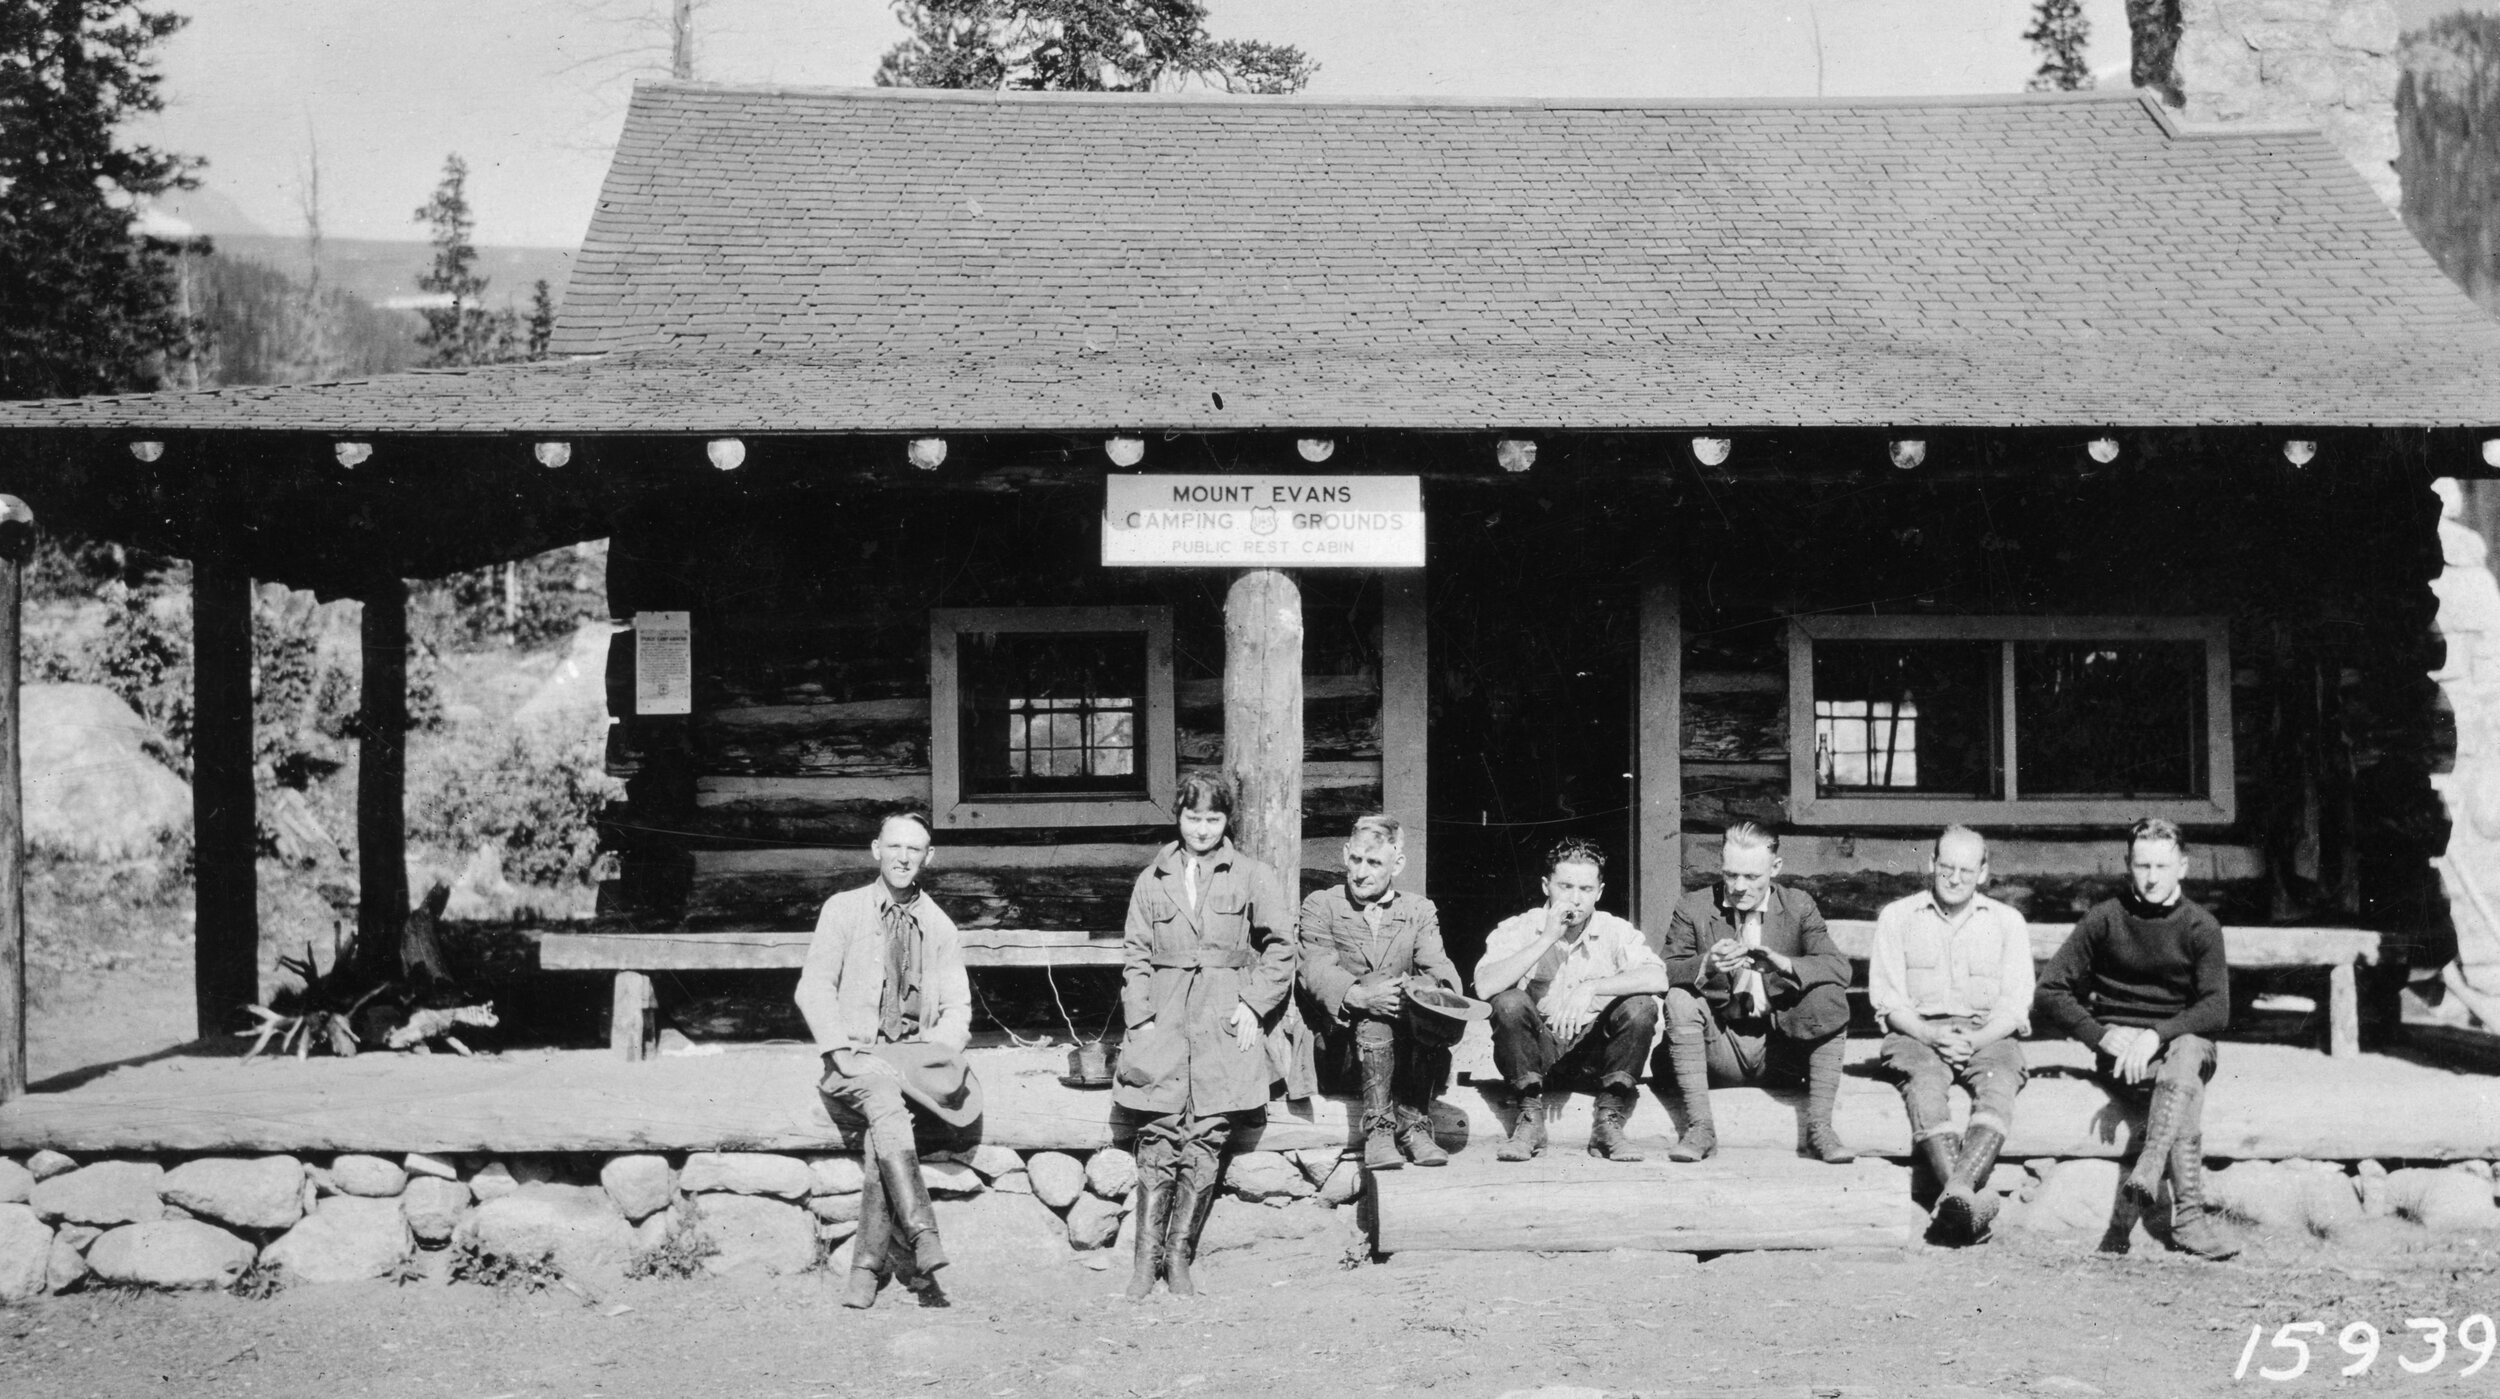  This Resthouse photo from 1921 features two prominent figures. Arthur Carhart (third from the right) was the first U.S. Forest Service landscape architect and one of the first U.S. conservation experts, inspiring Wilderness protection. William Kelso